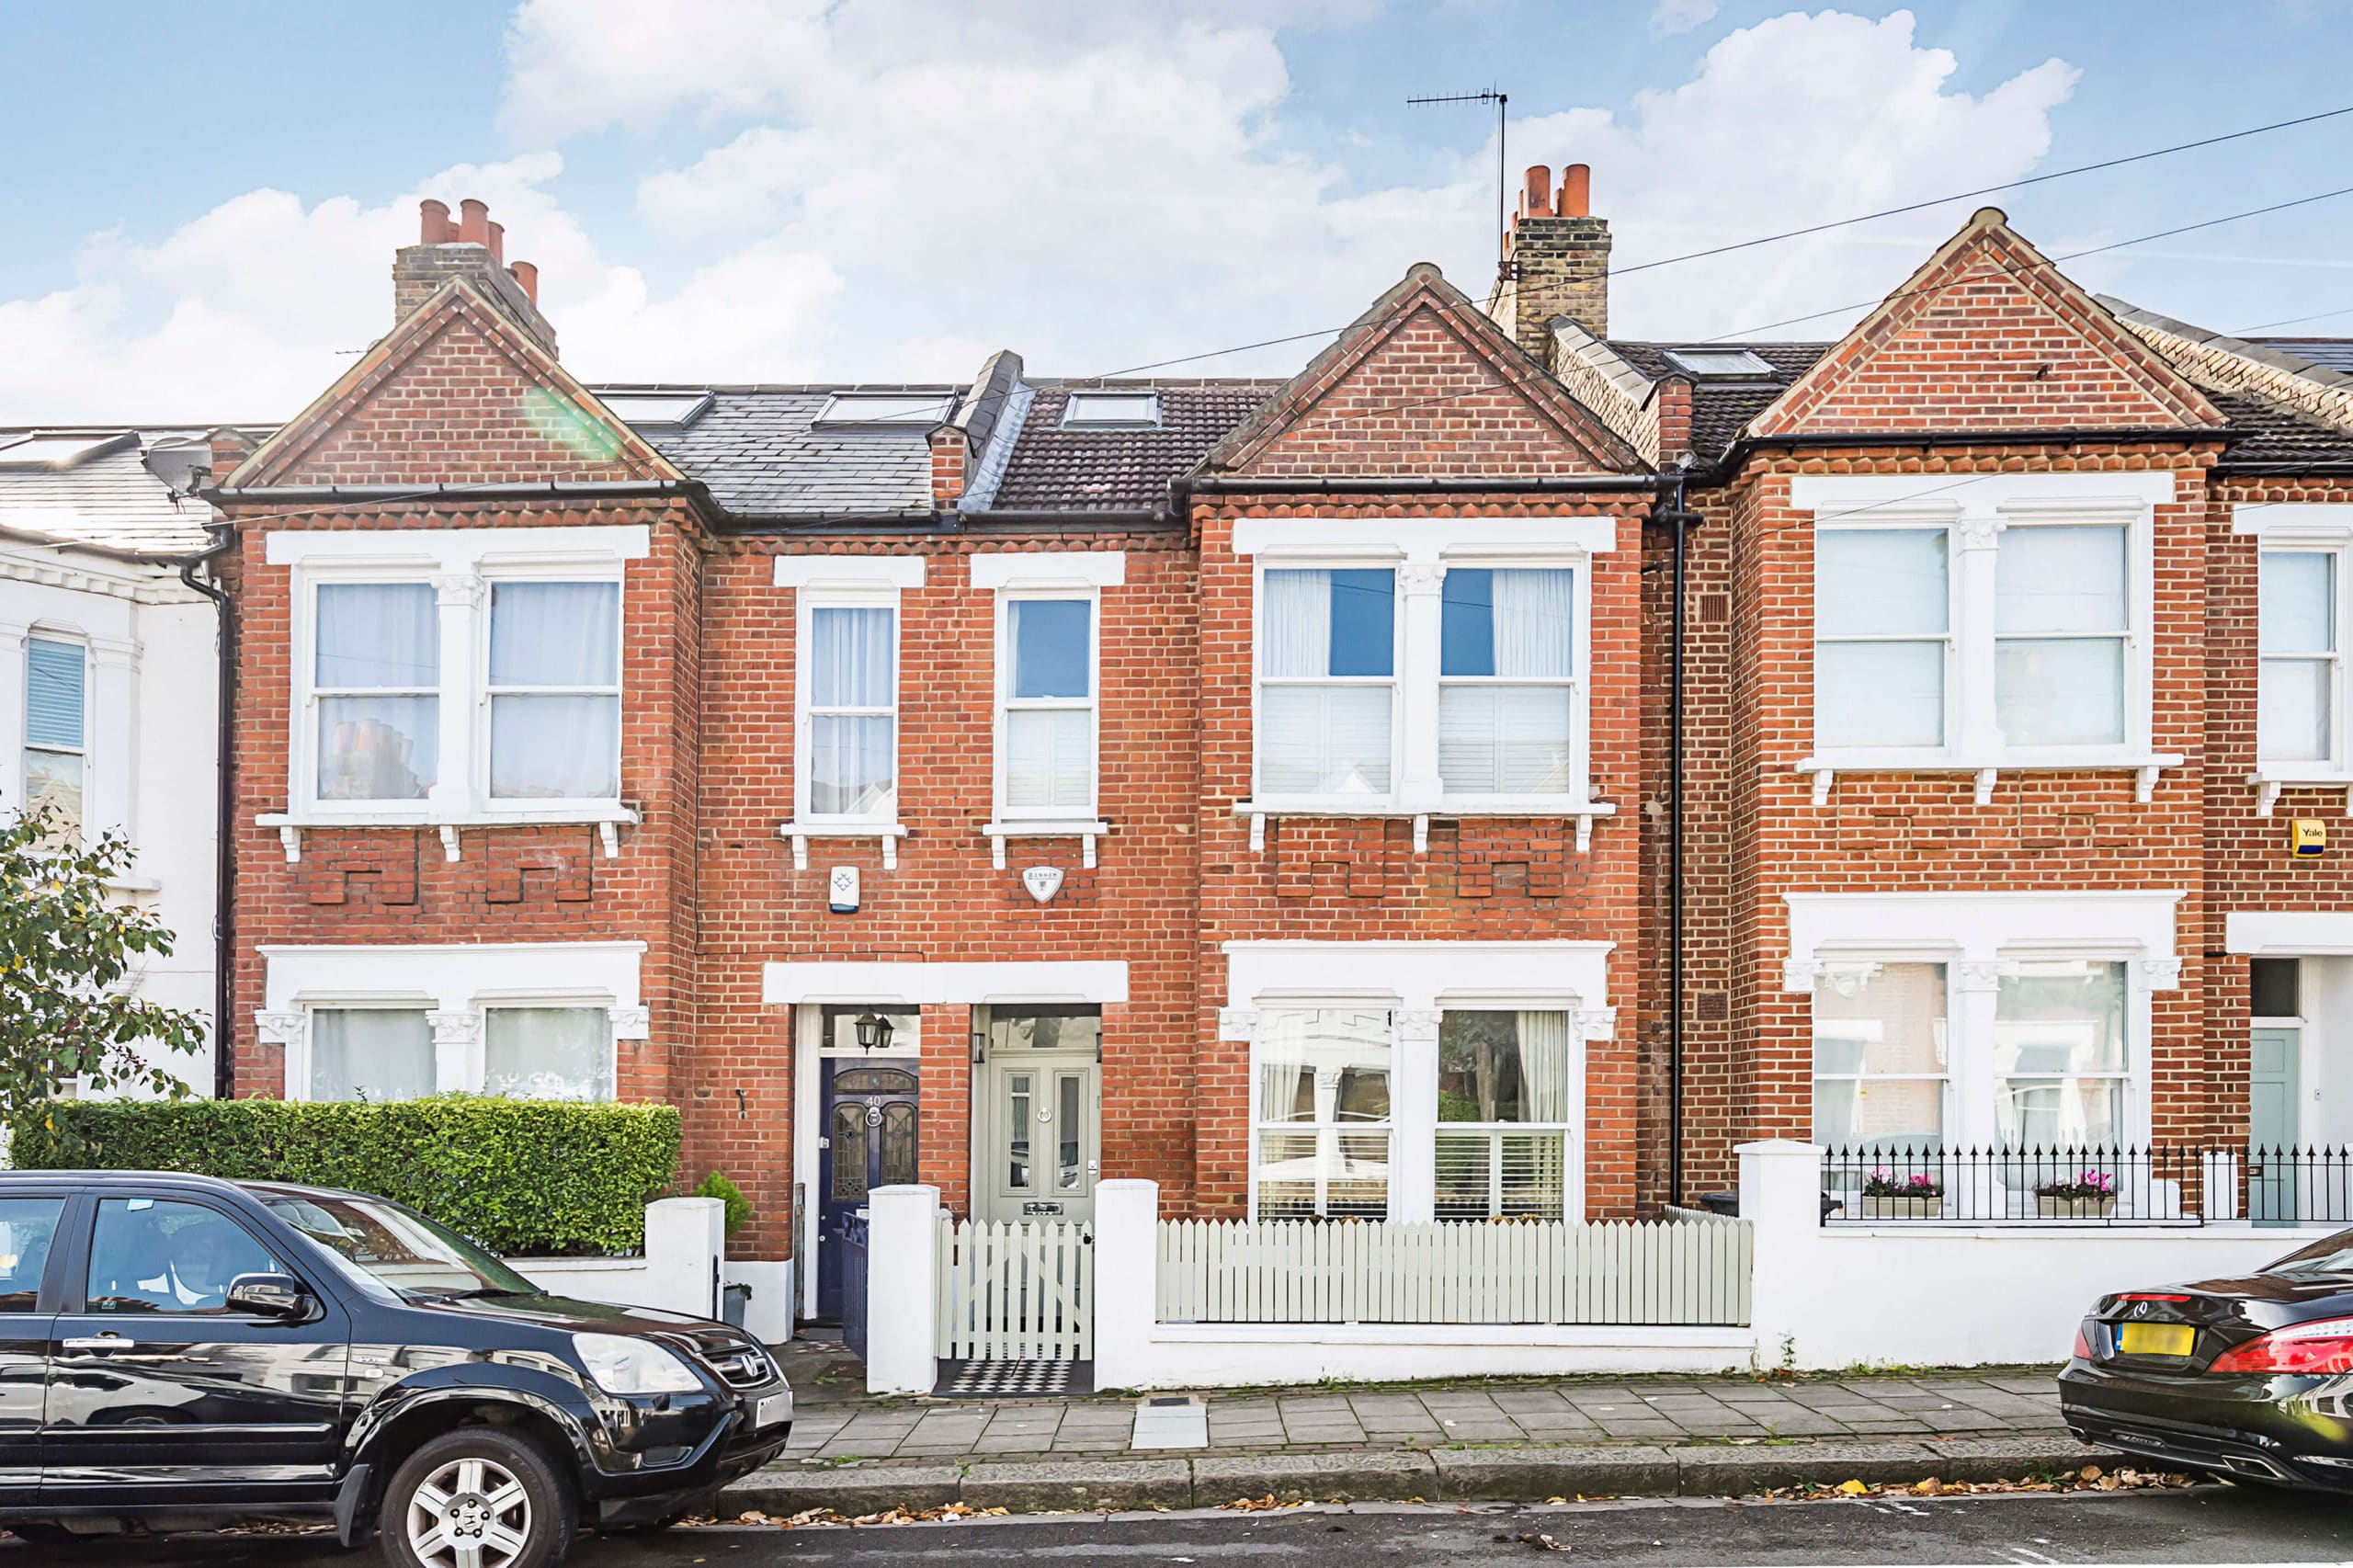 Acquisition of the Month 2 - Cathles Road, Balham SW12